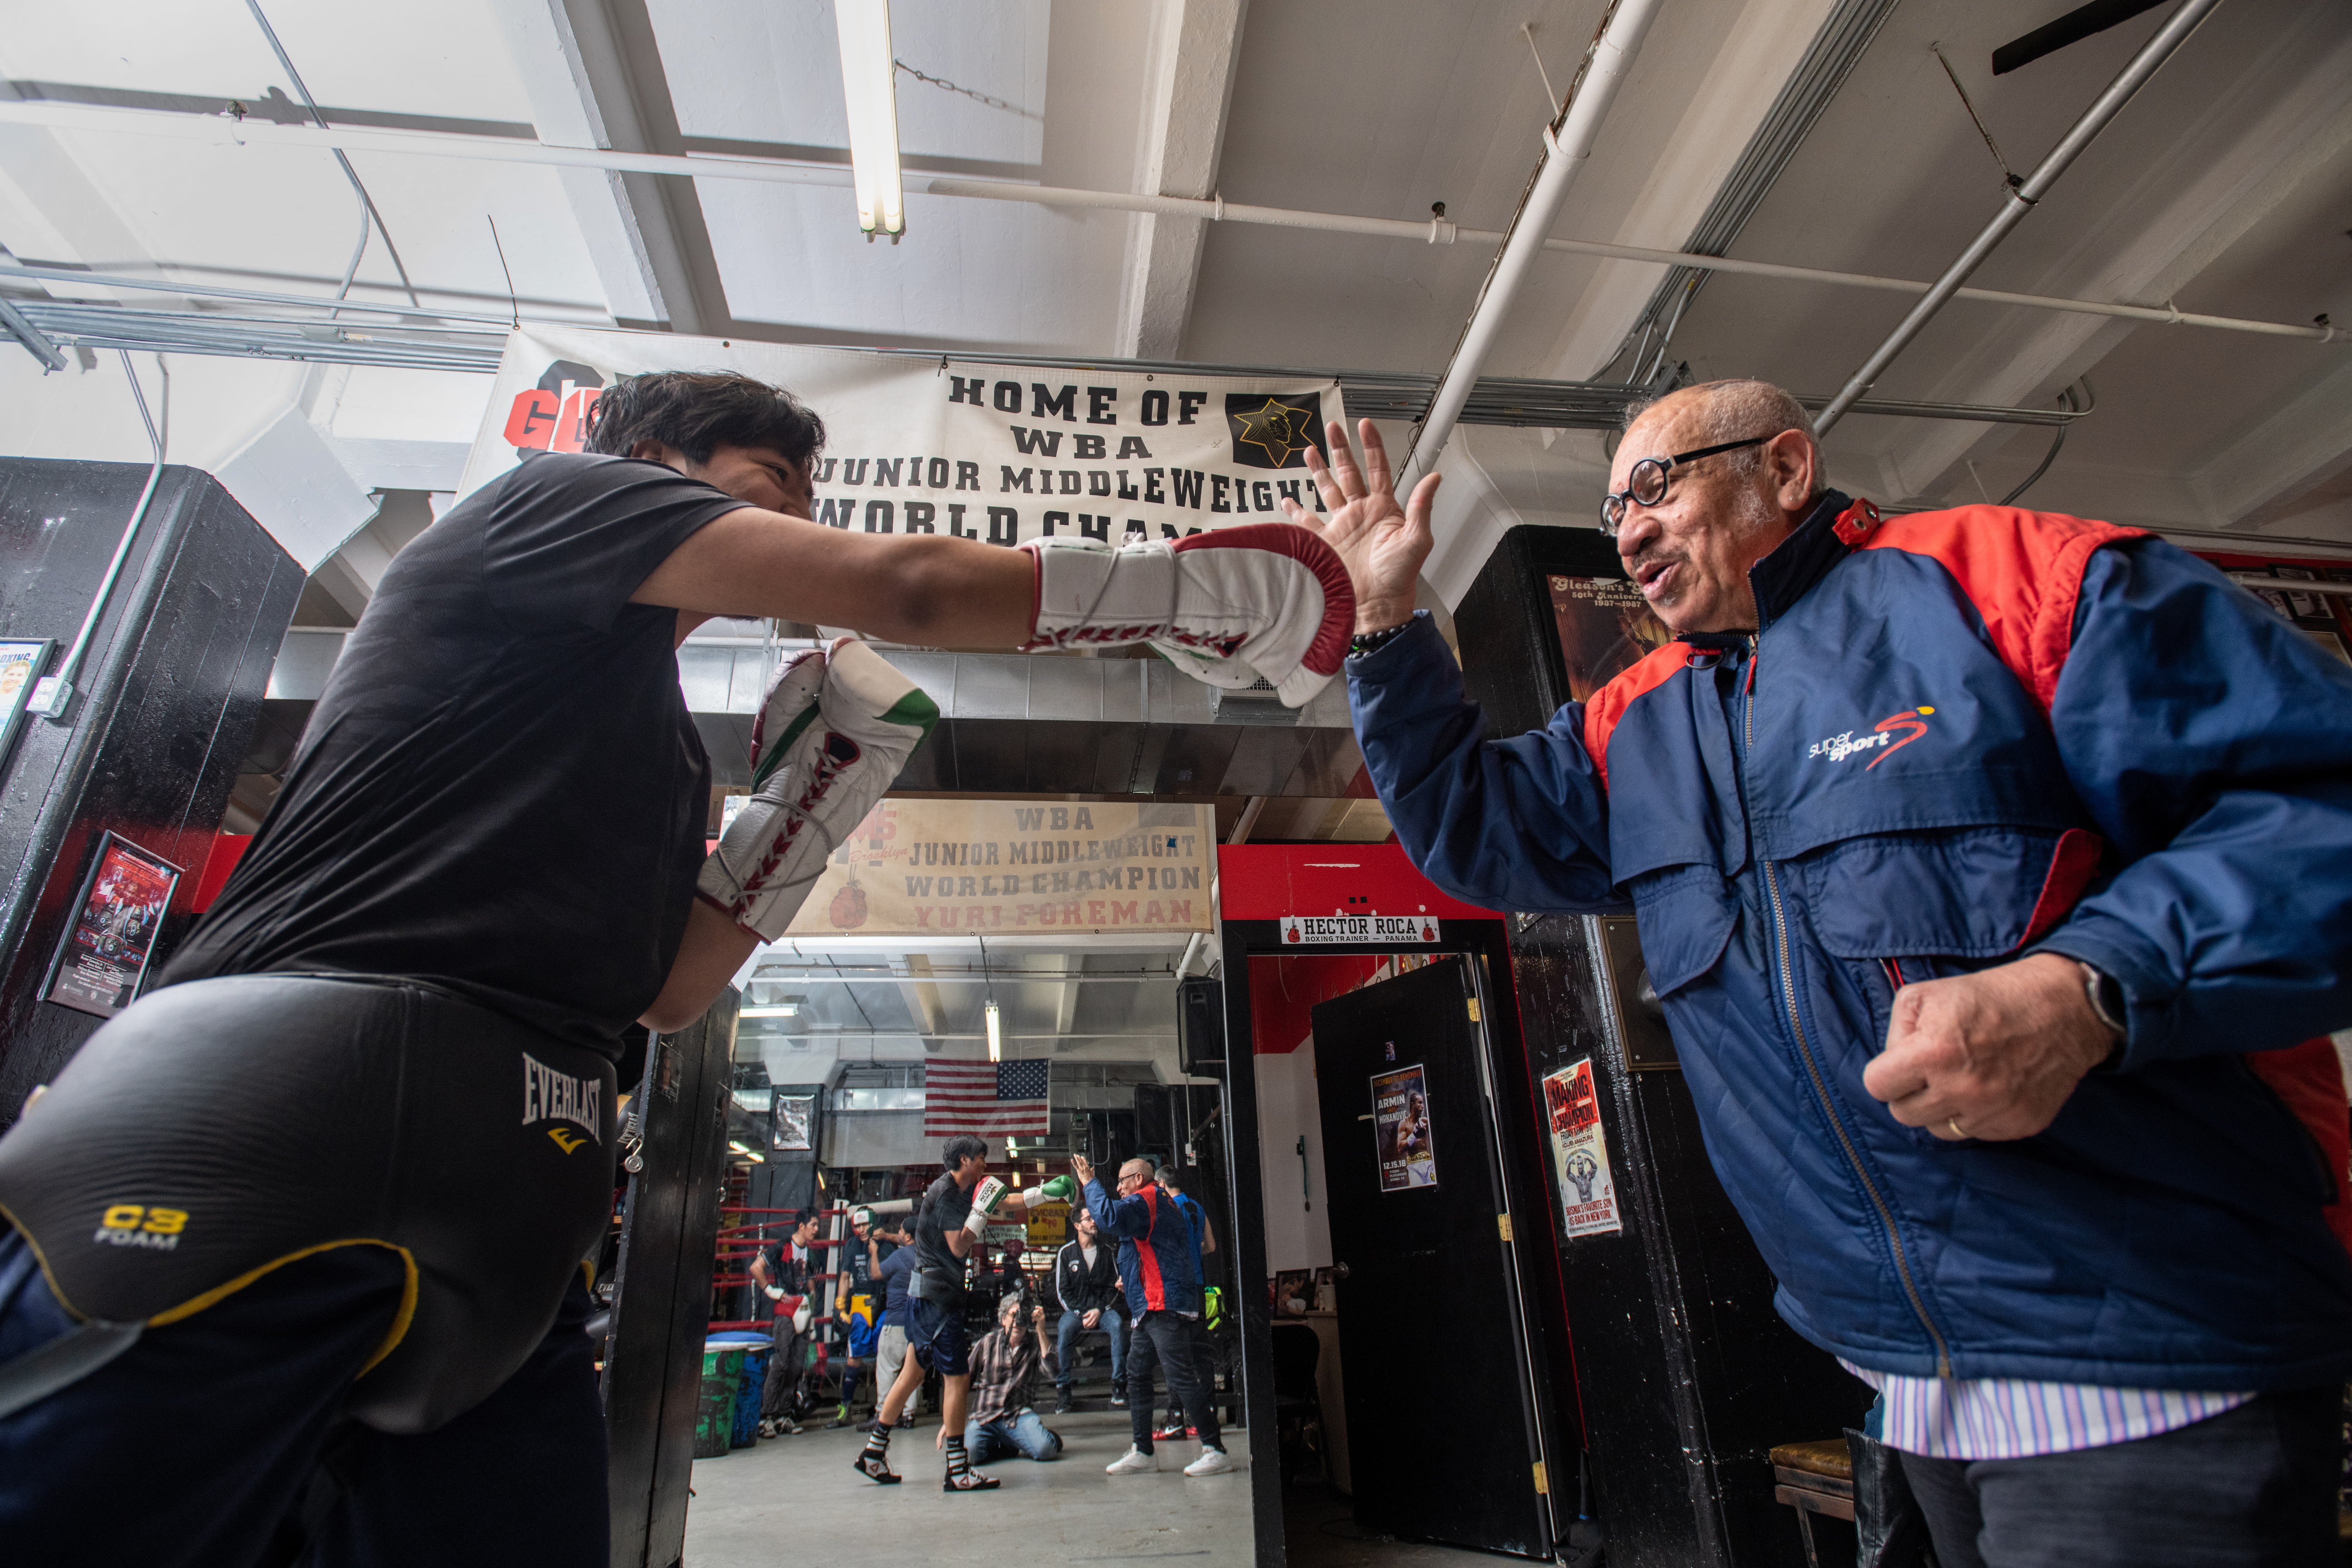 © 2019  PHILIP GREENBERGphilipgreenberg1@gmail.com 917 804 8385www.pgreenbergphoto.comHector Roca, a fixture at the famed and fabled Gleason’s Gym,   Possession of images does not give permission for use.Always  Check with Photographer before intended usage. Always Check with photographer for Editorial use and requests by magazines ...Possession of images does not always give permission for use.©2019 Philip Greenberg917 804 8385 philipgreenberg1@gmail.com